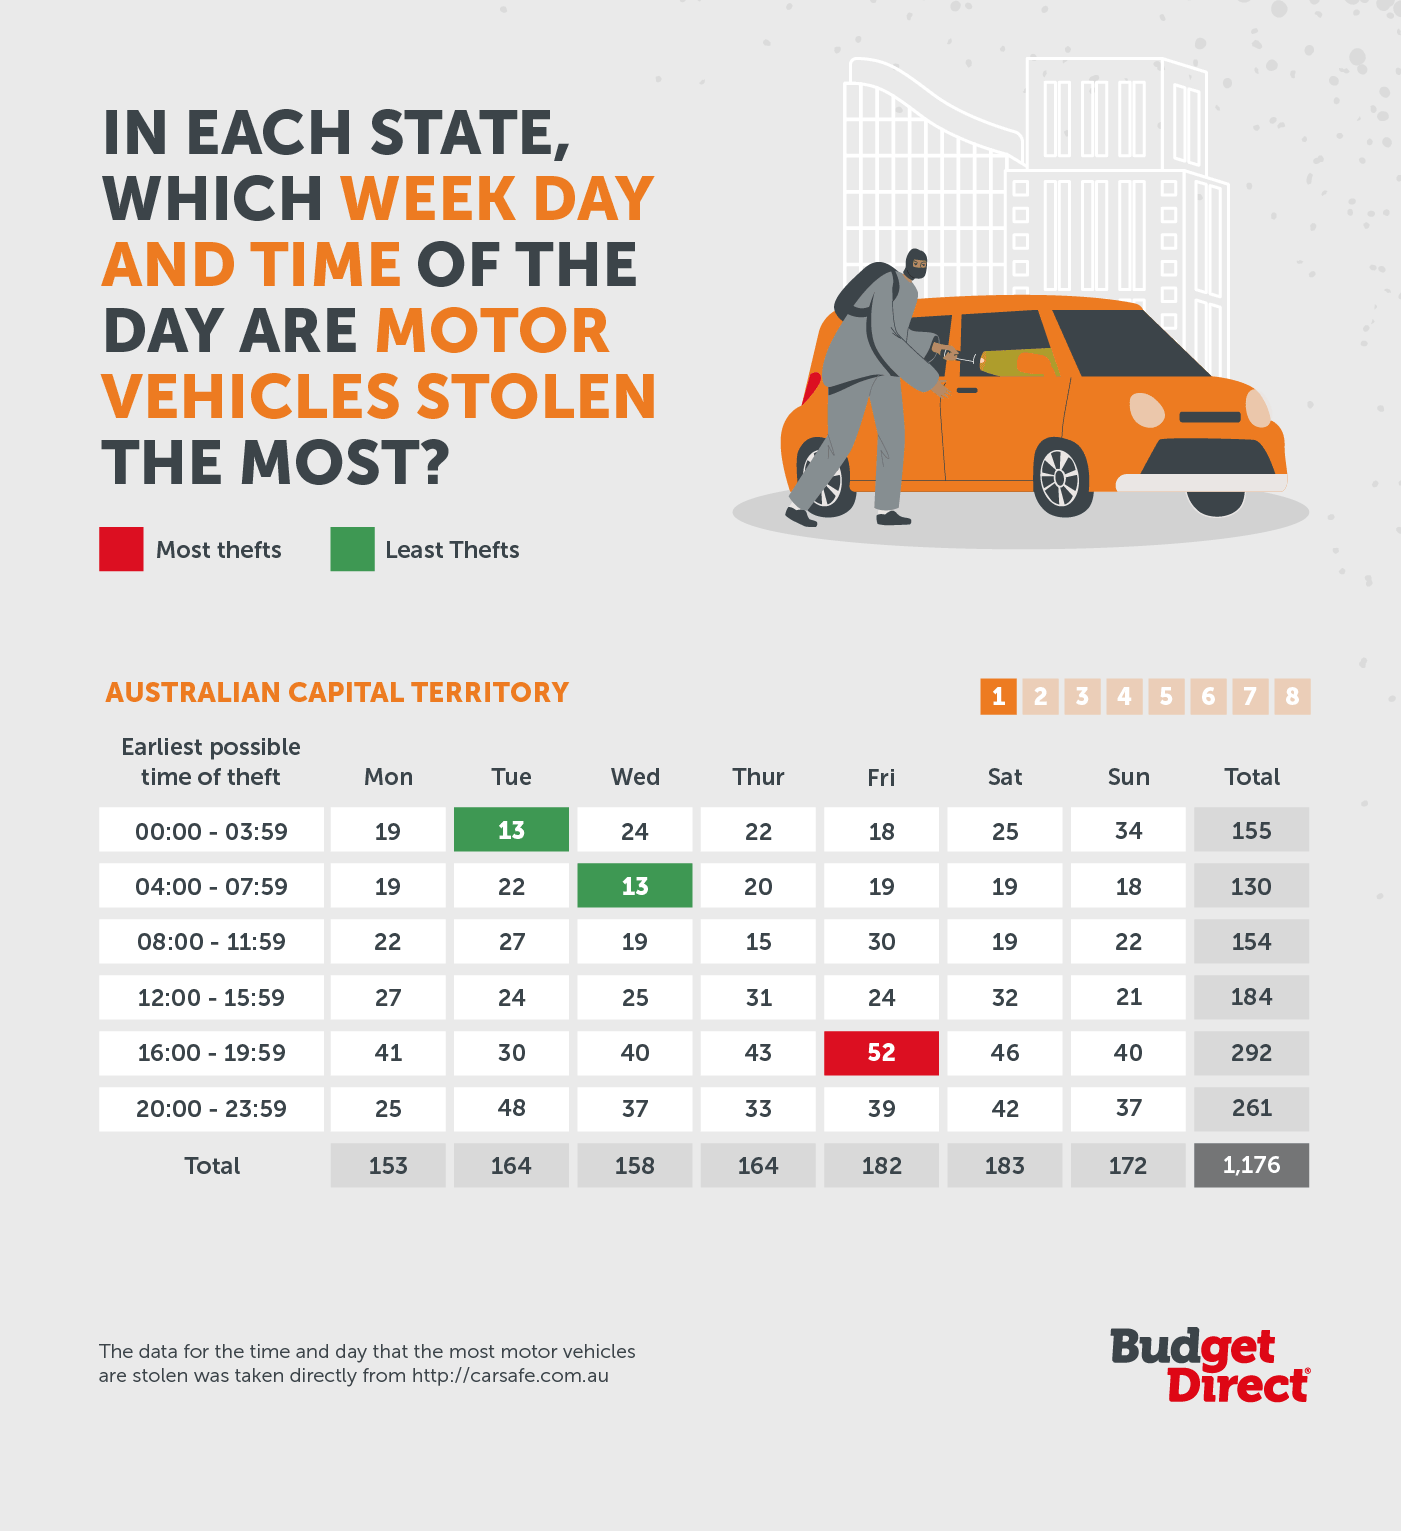 In each state, which week day and time of the day are motor vehicles stolen the most?